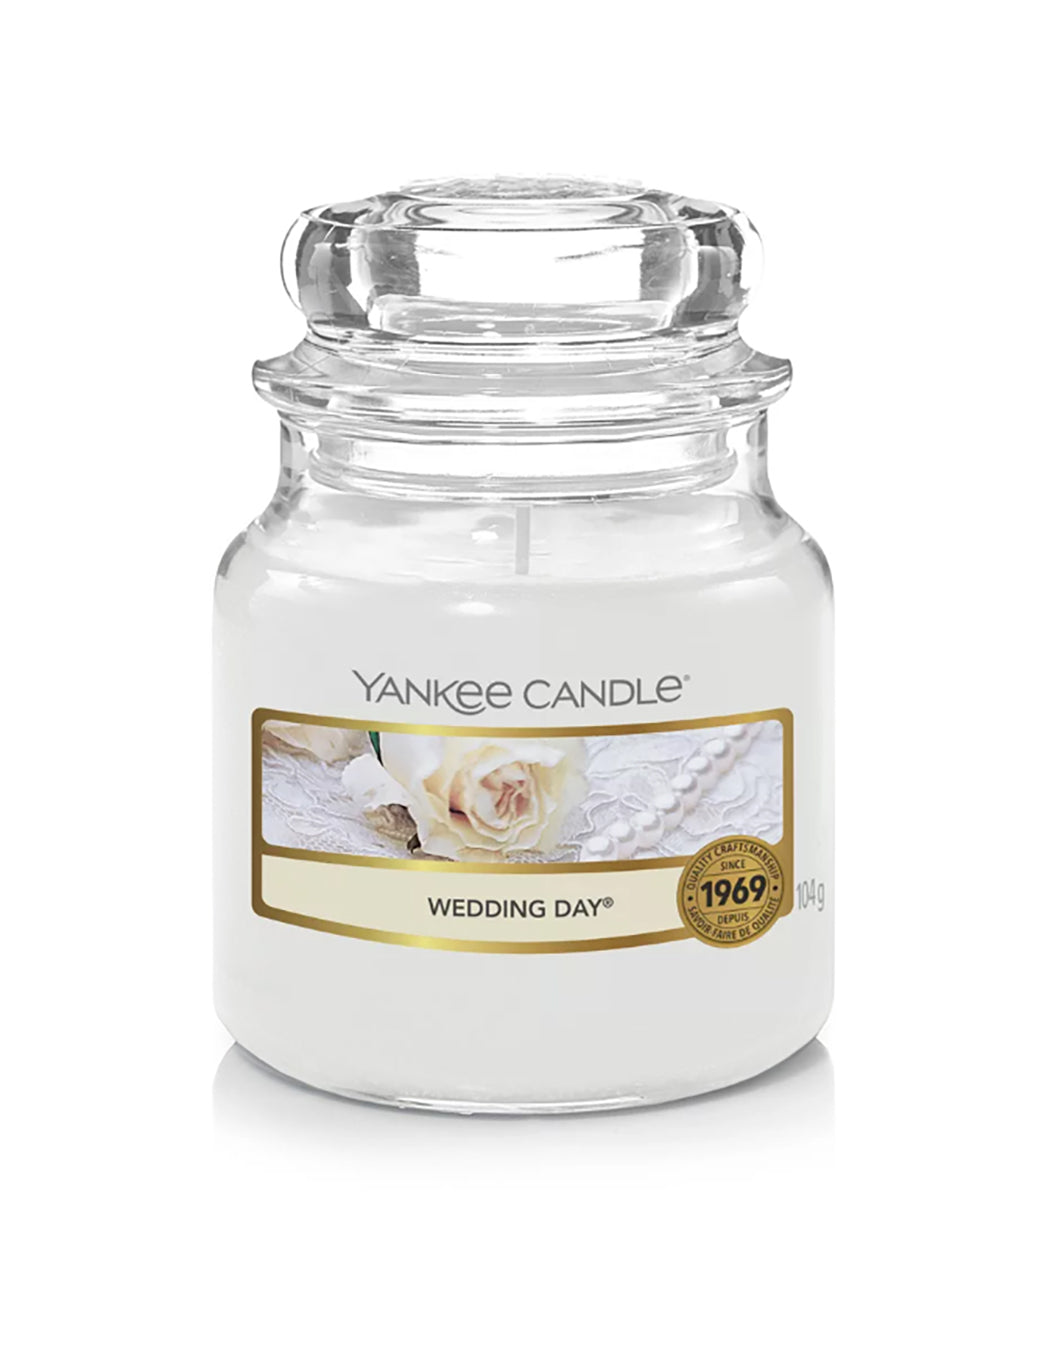 Yankee Candle Wedding Day Small Jar Candle